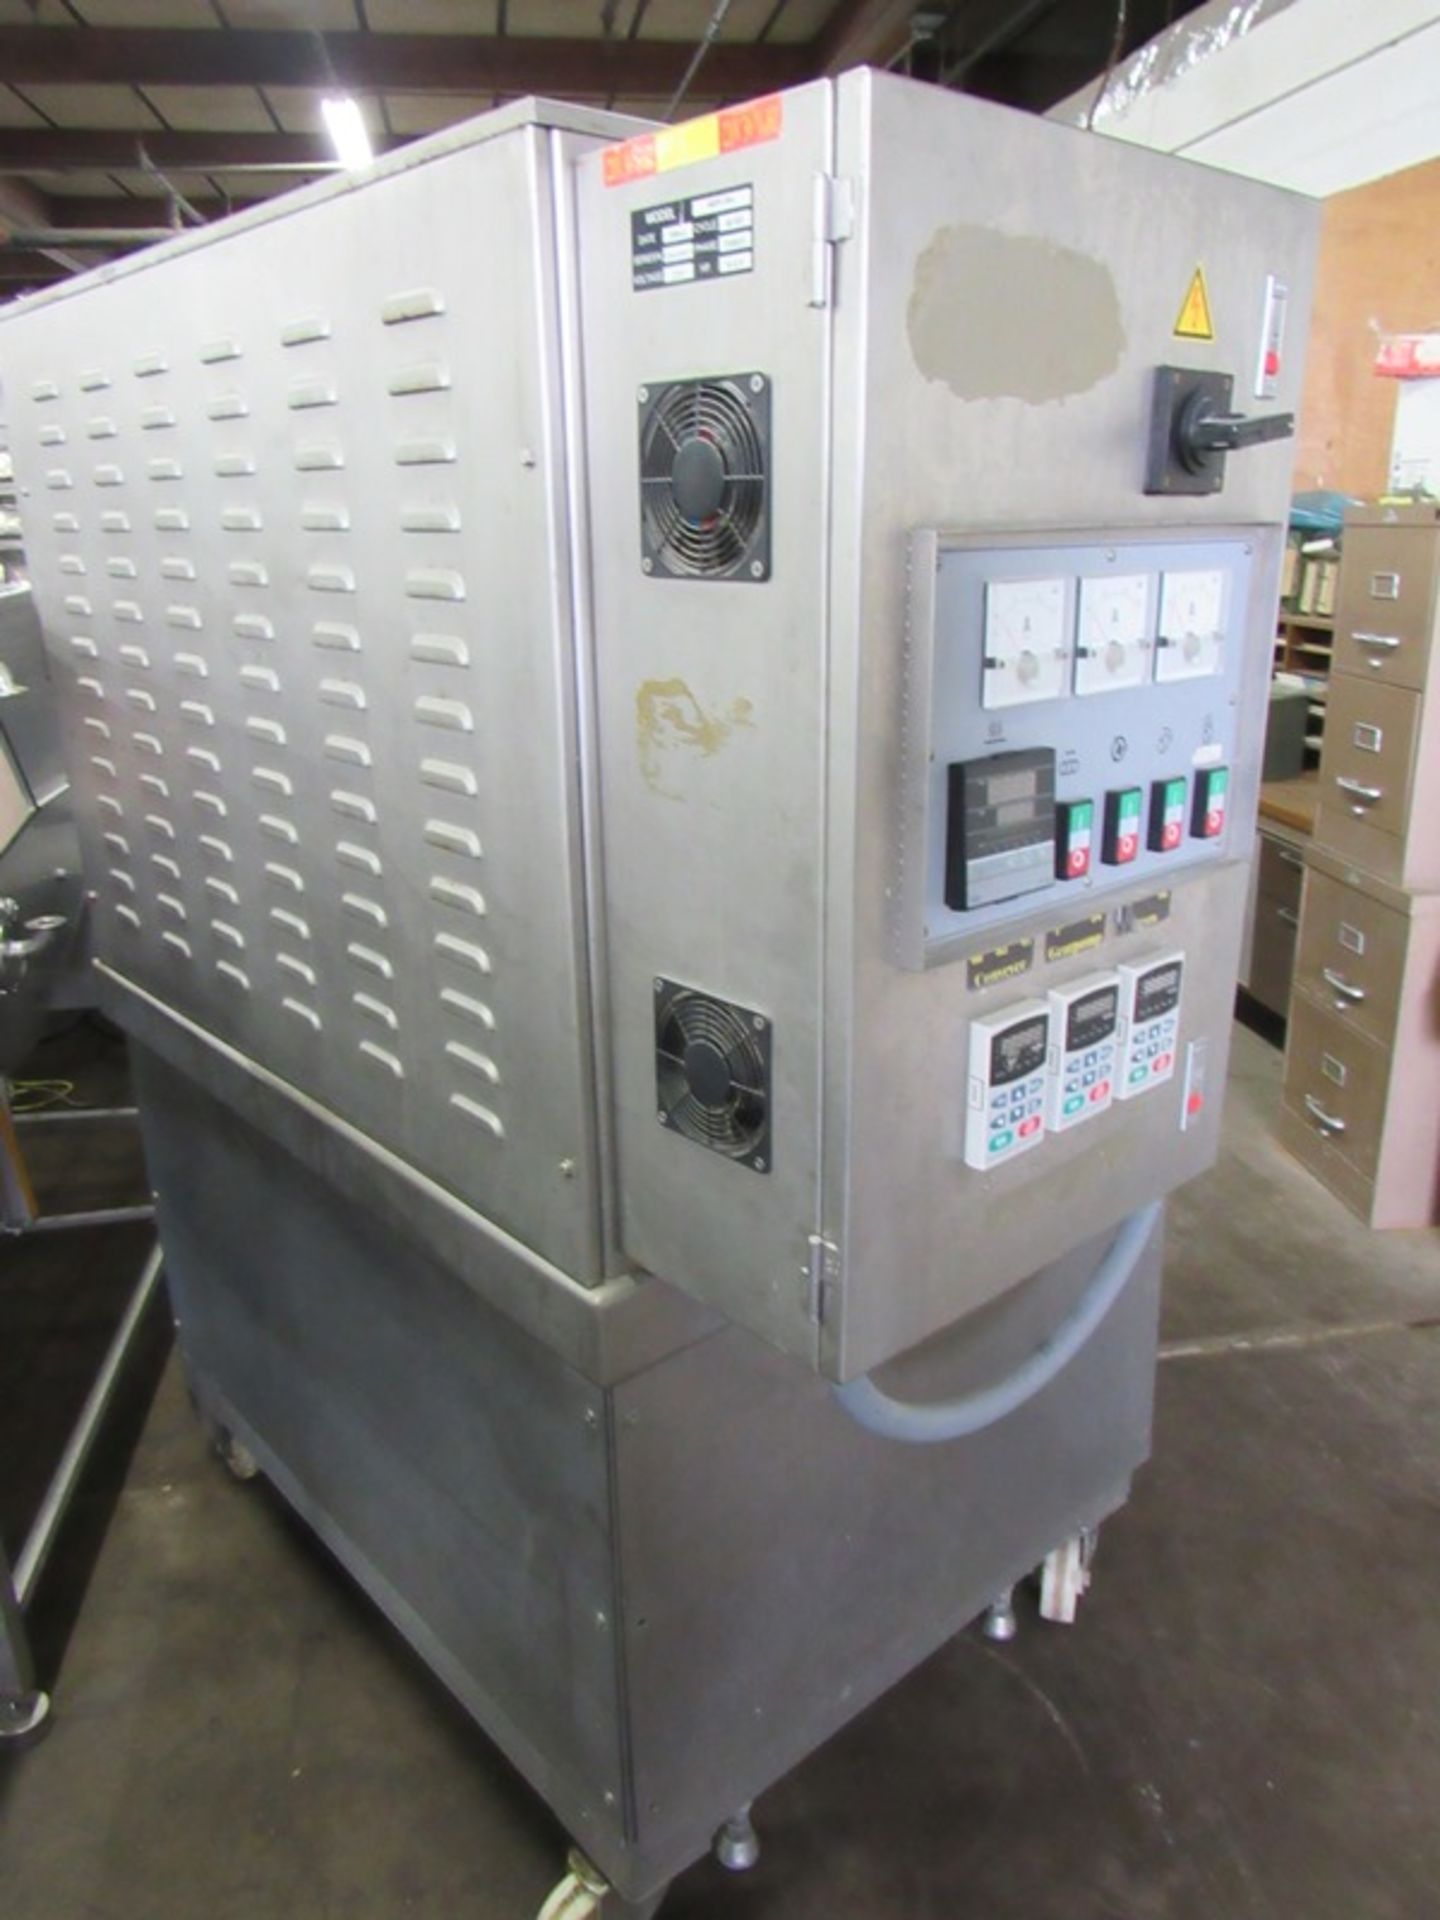 ANKO Mdl. SRPF-20A Drum Cooker, manual controls with digital readouts, 480 volts - Image 2 of 7